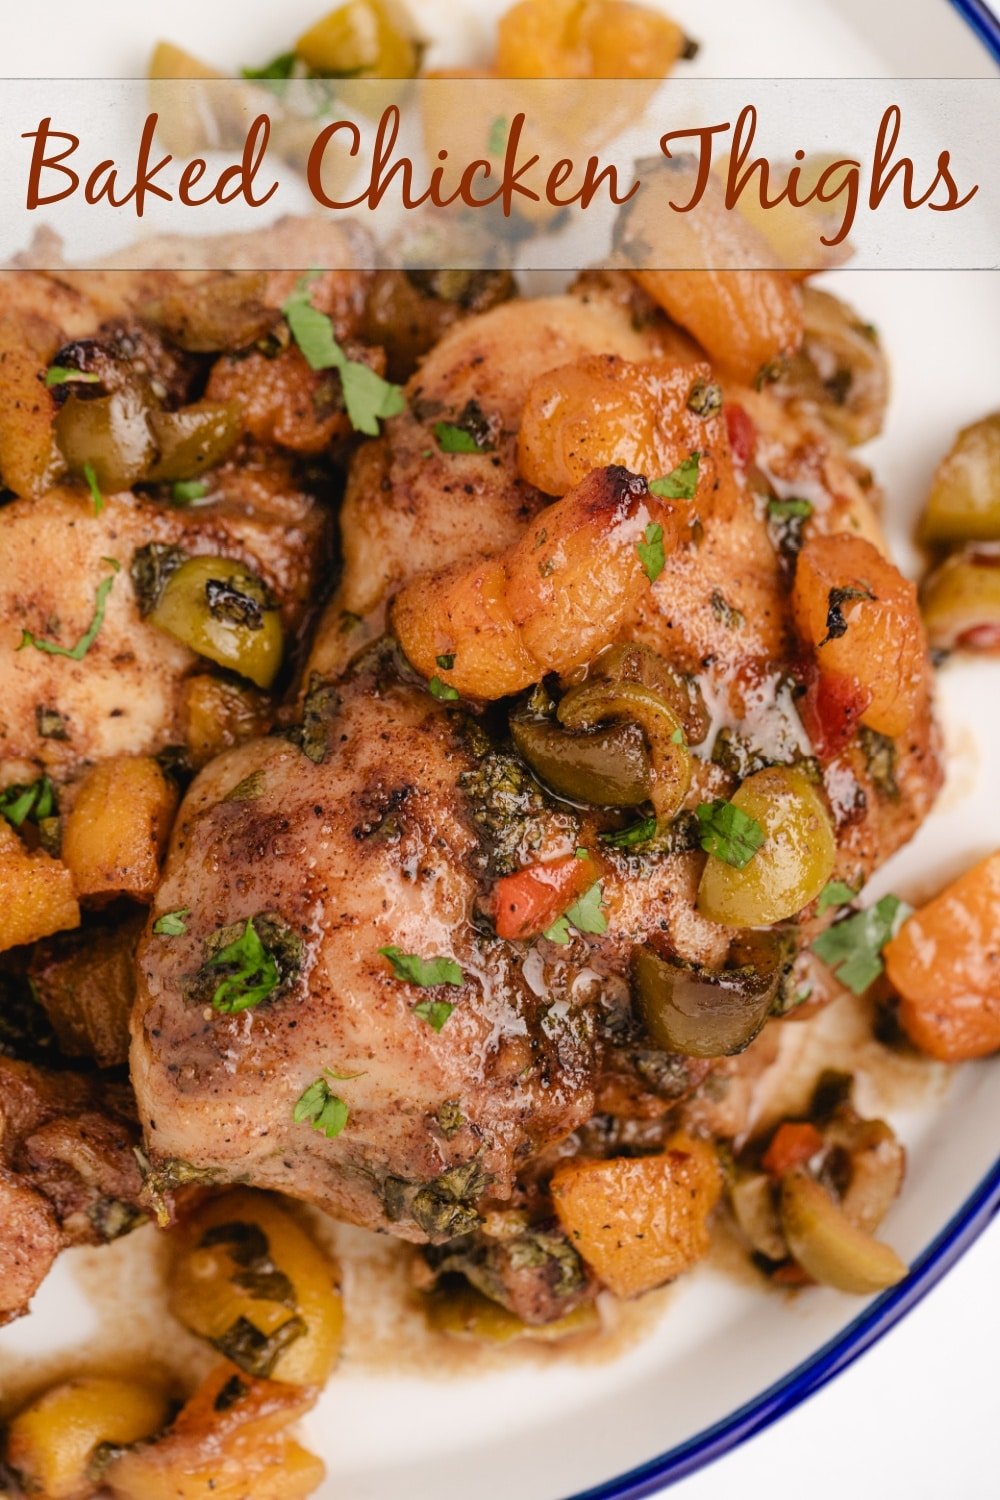 Oven baked chicken thighs packed with savory, Moroccan flavors. The overnight marinade is key and makes this baked chicken thigh recipe a top contender for an easy dinner.  via @cmpollak1